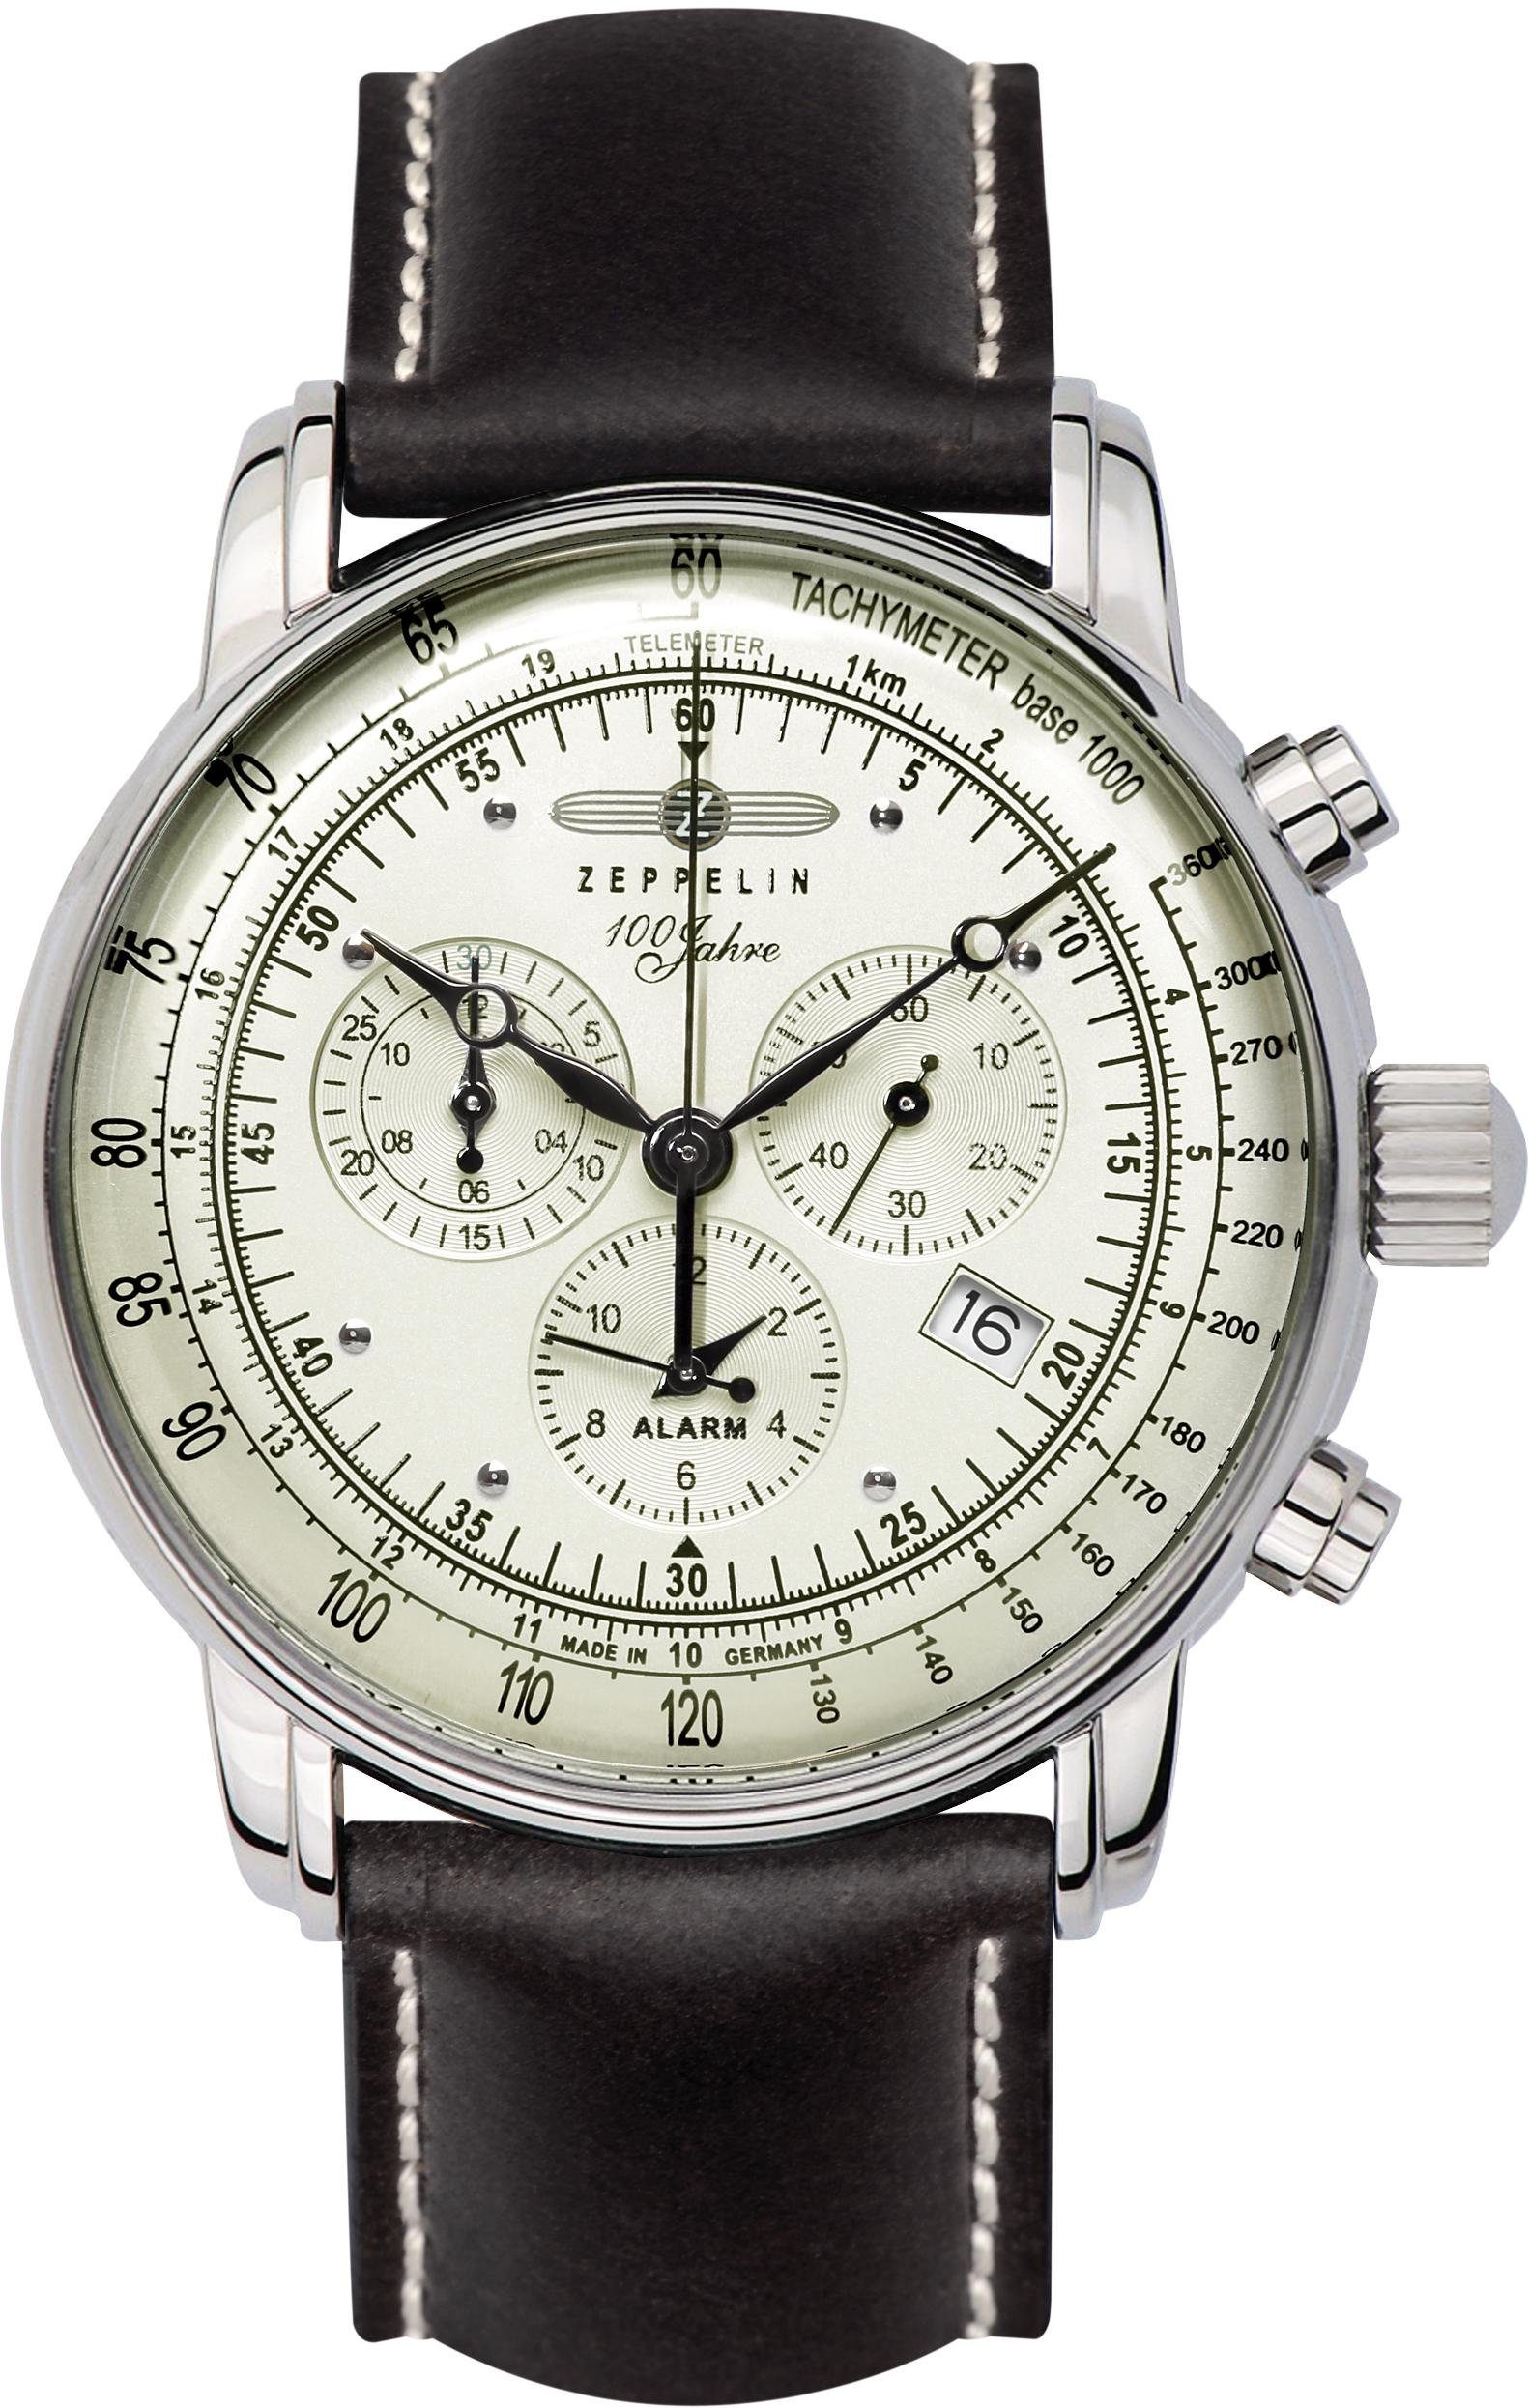 Zeppelin, Made ZEPPELIN 8680-3, in 100 Chronograph Jahre Germany